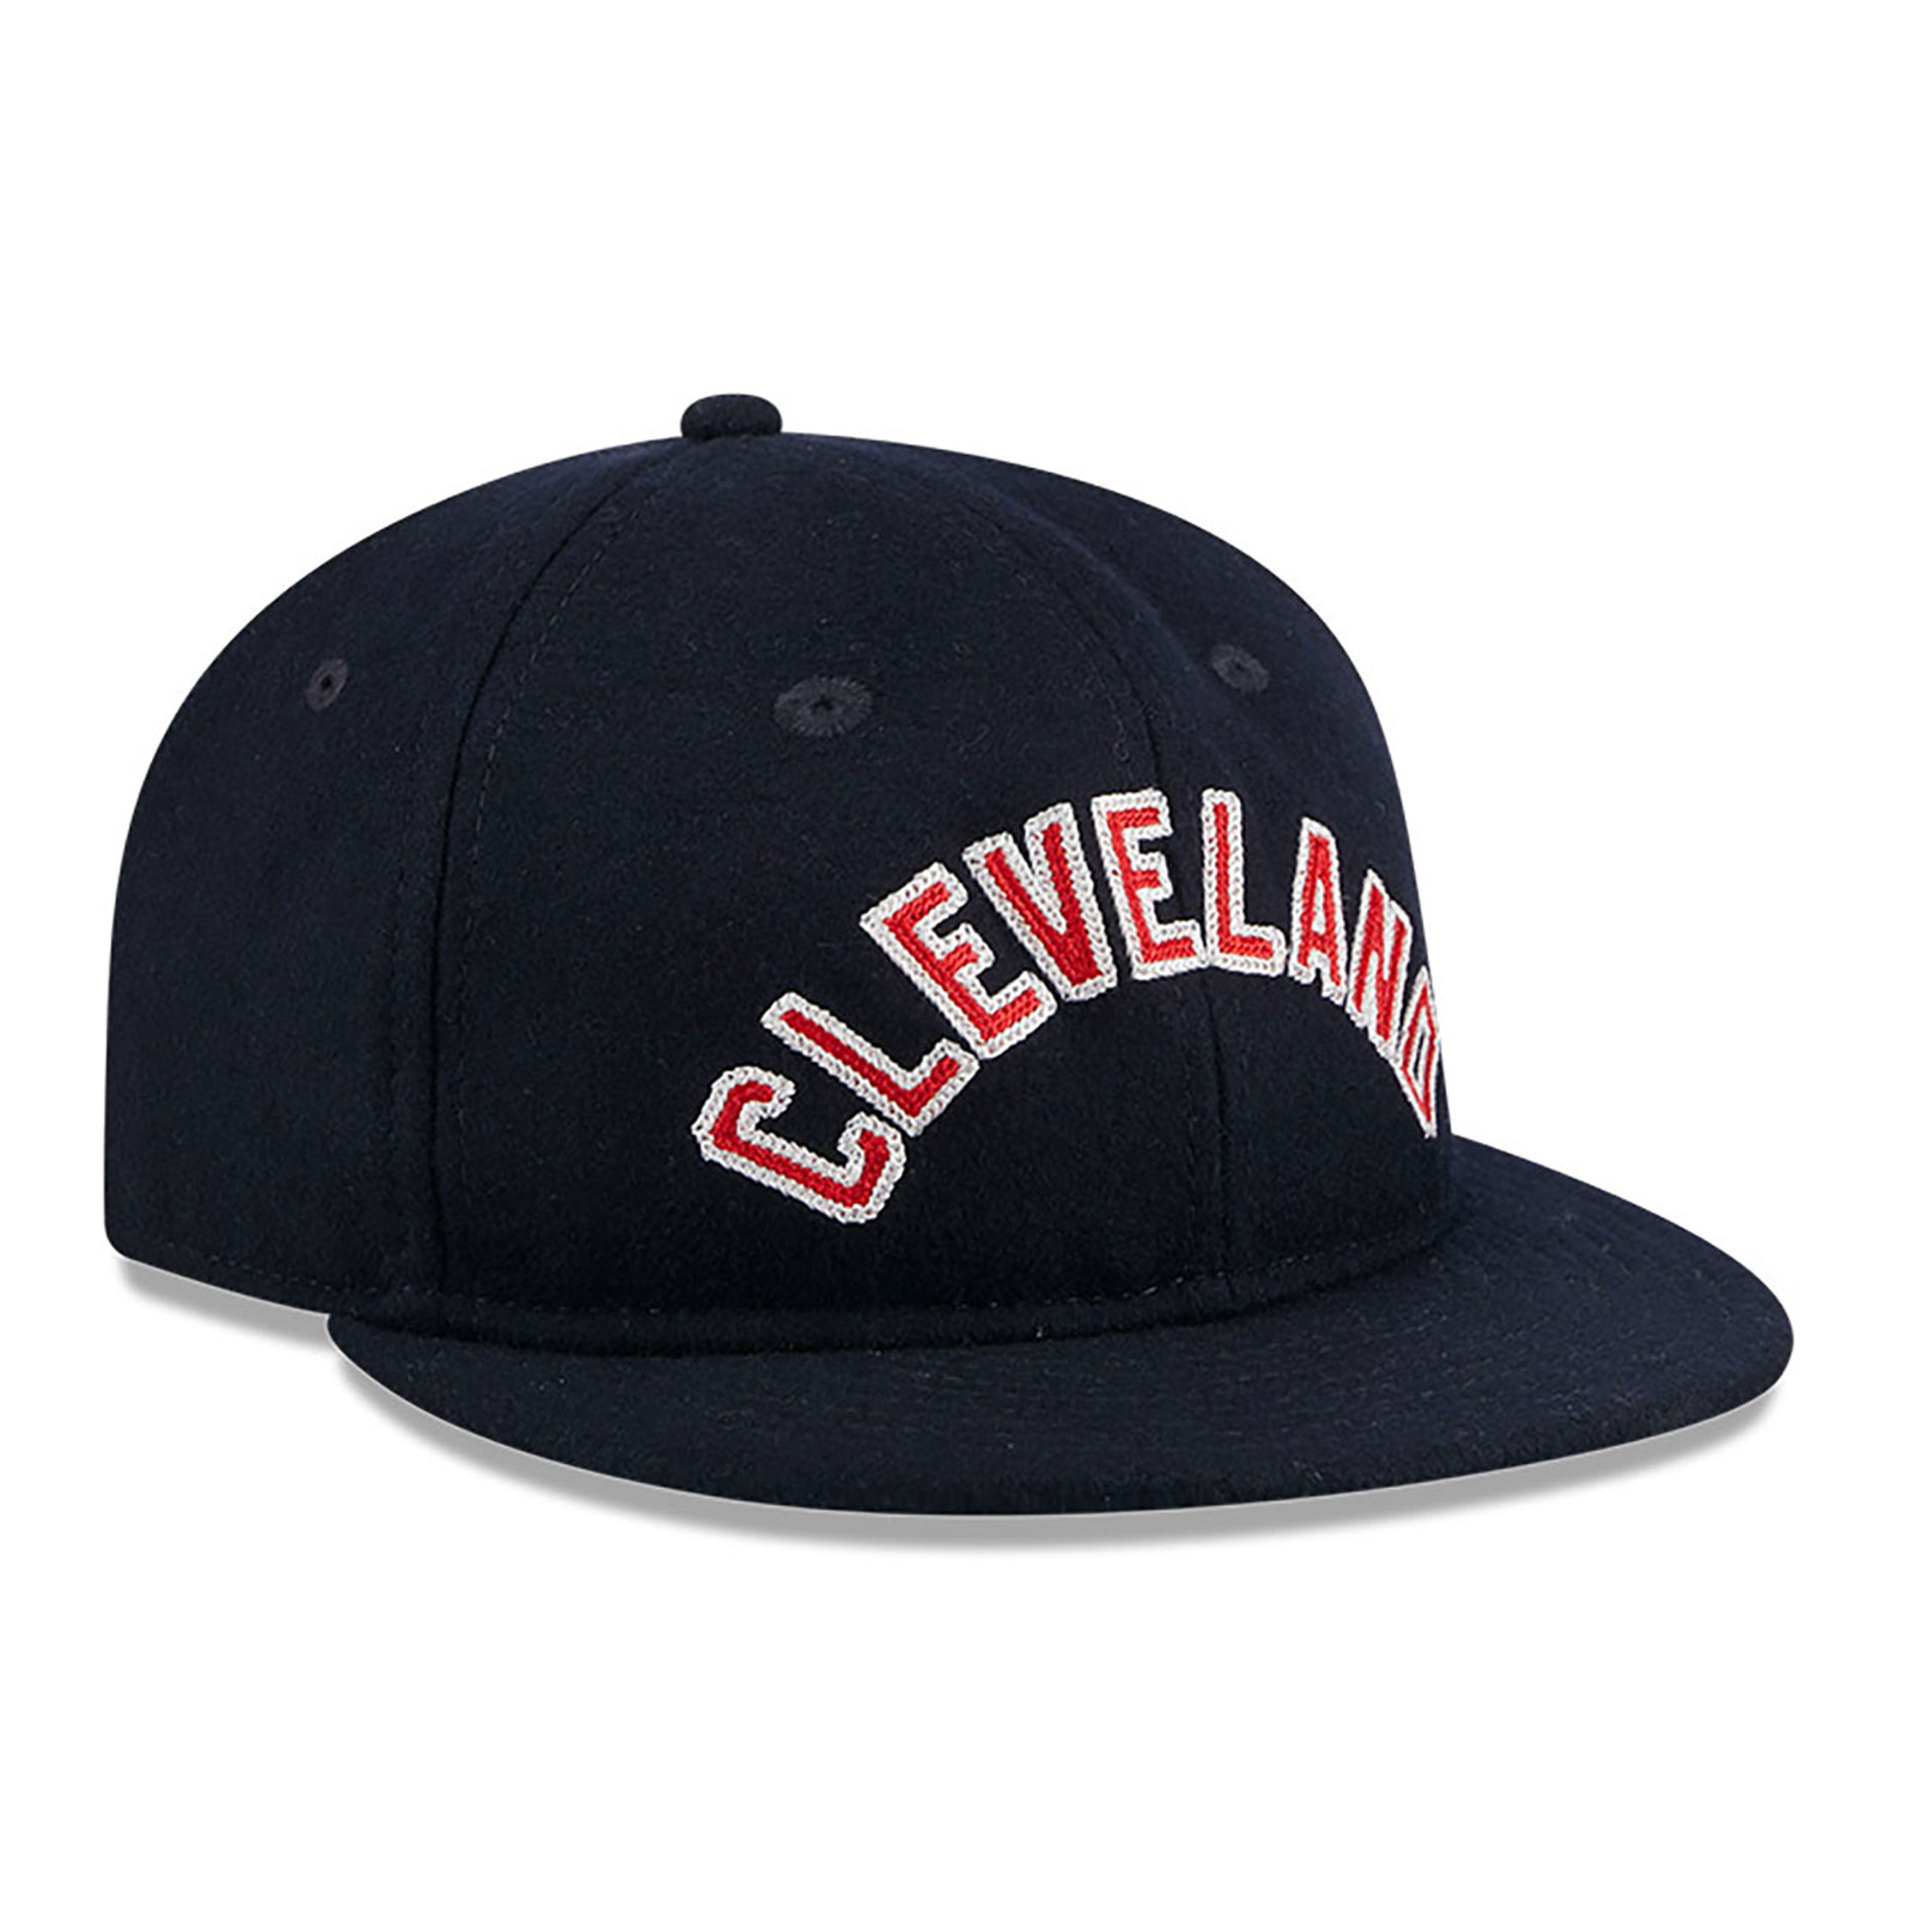 Cleveland Indians Melton Wool Navy Retro Crown 9FIFTY Strapback Cap